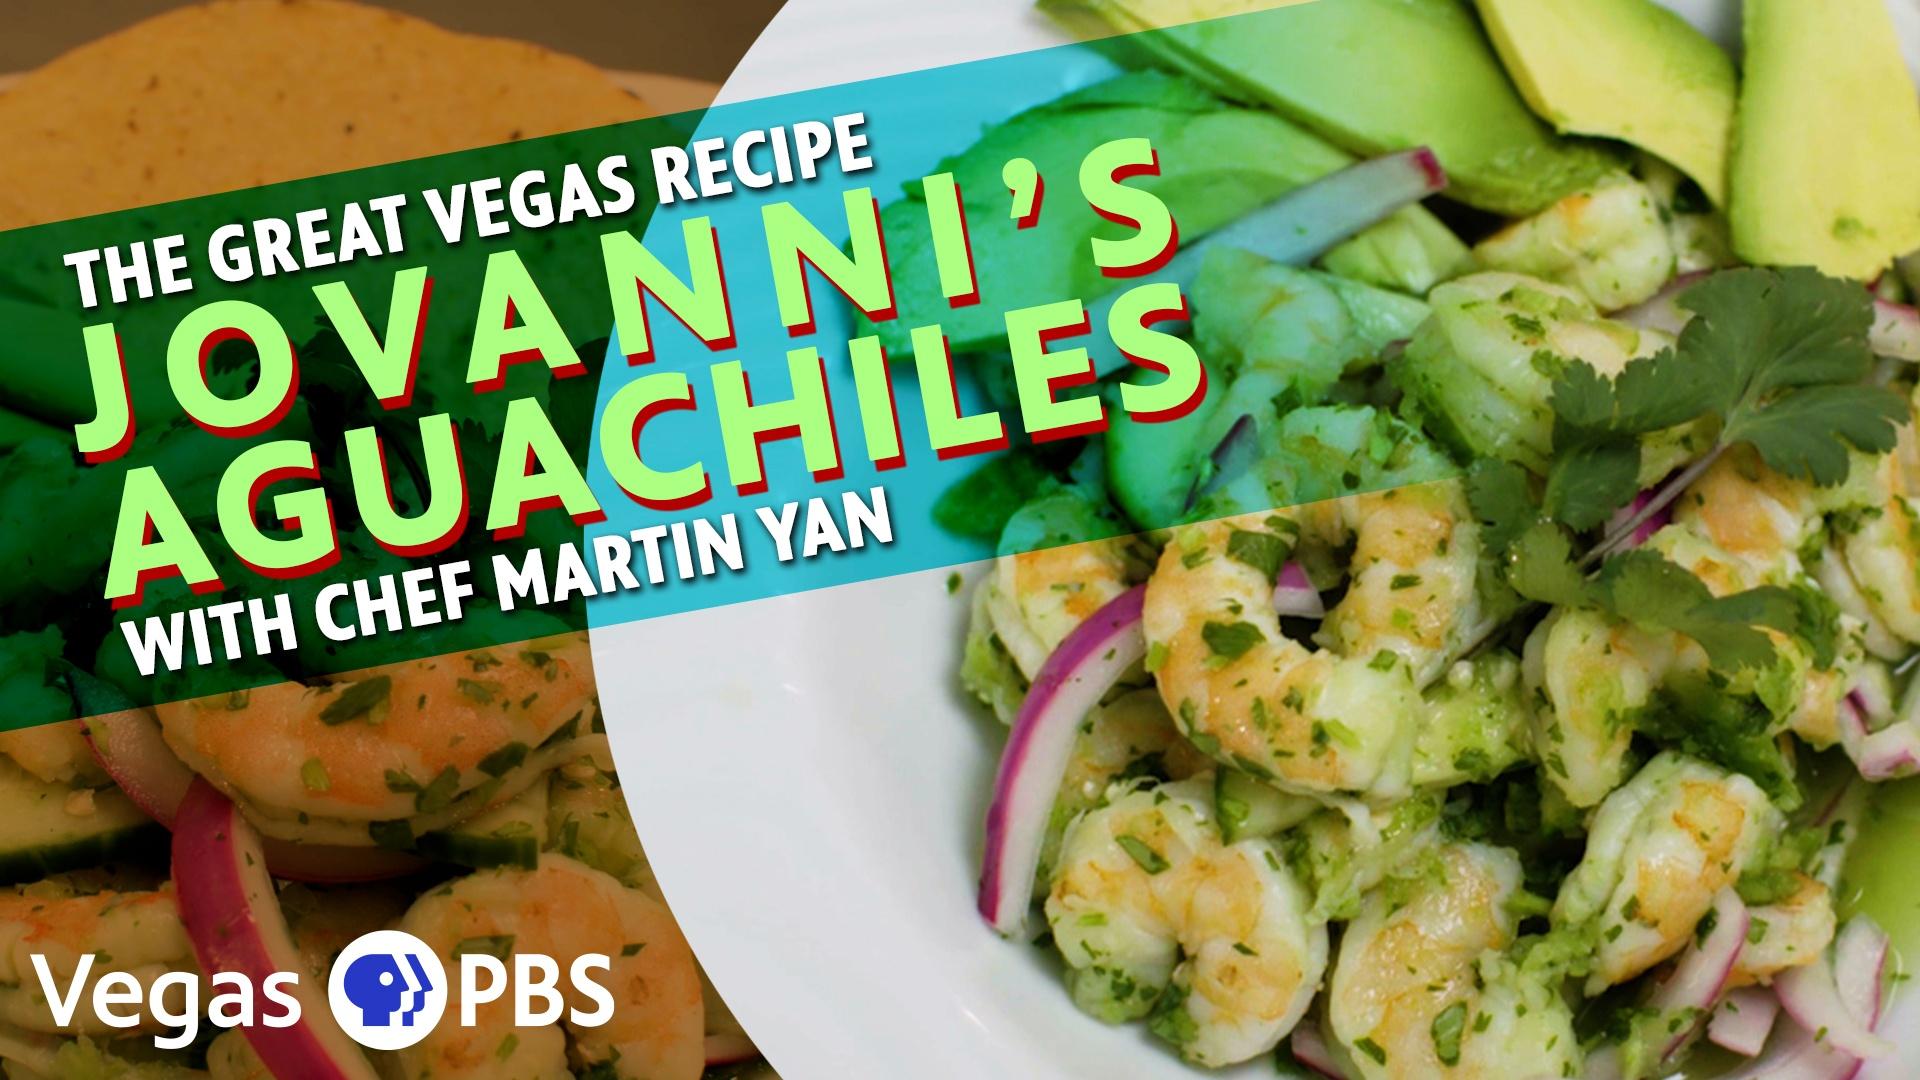 The Great Vegas Recipe with Martin Yan and Jovanni